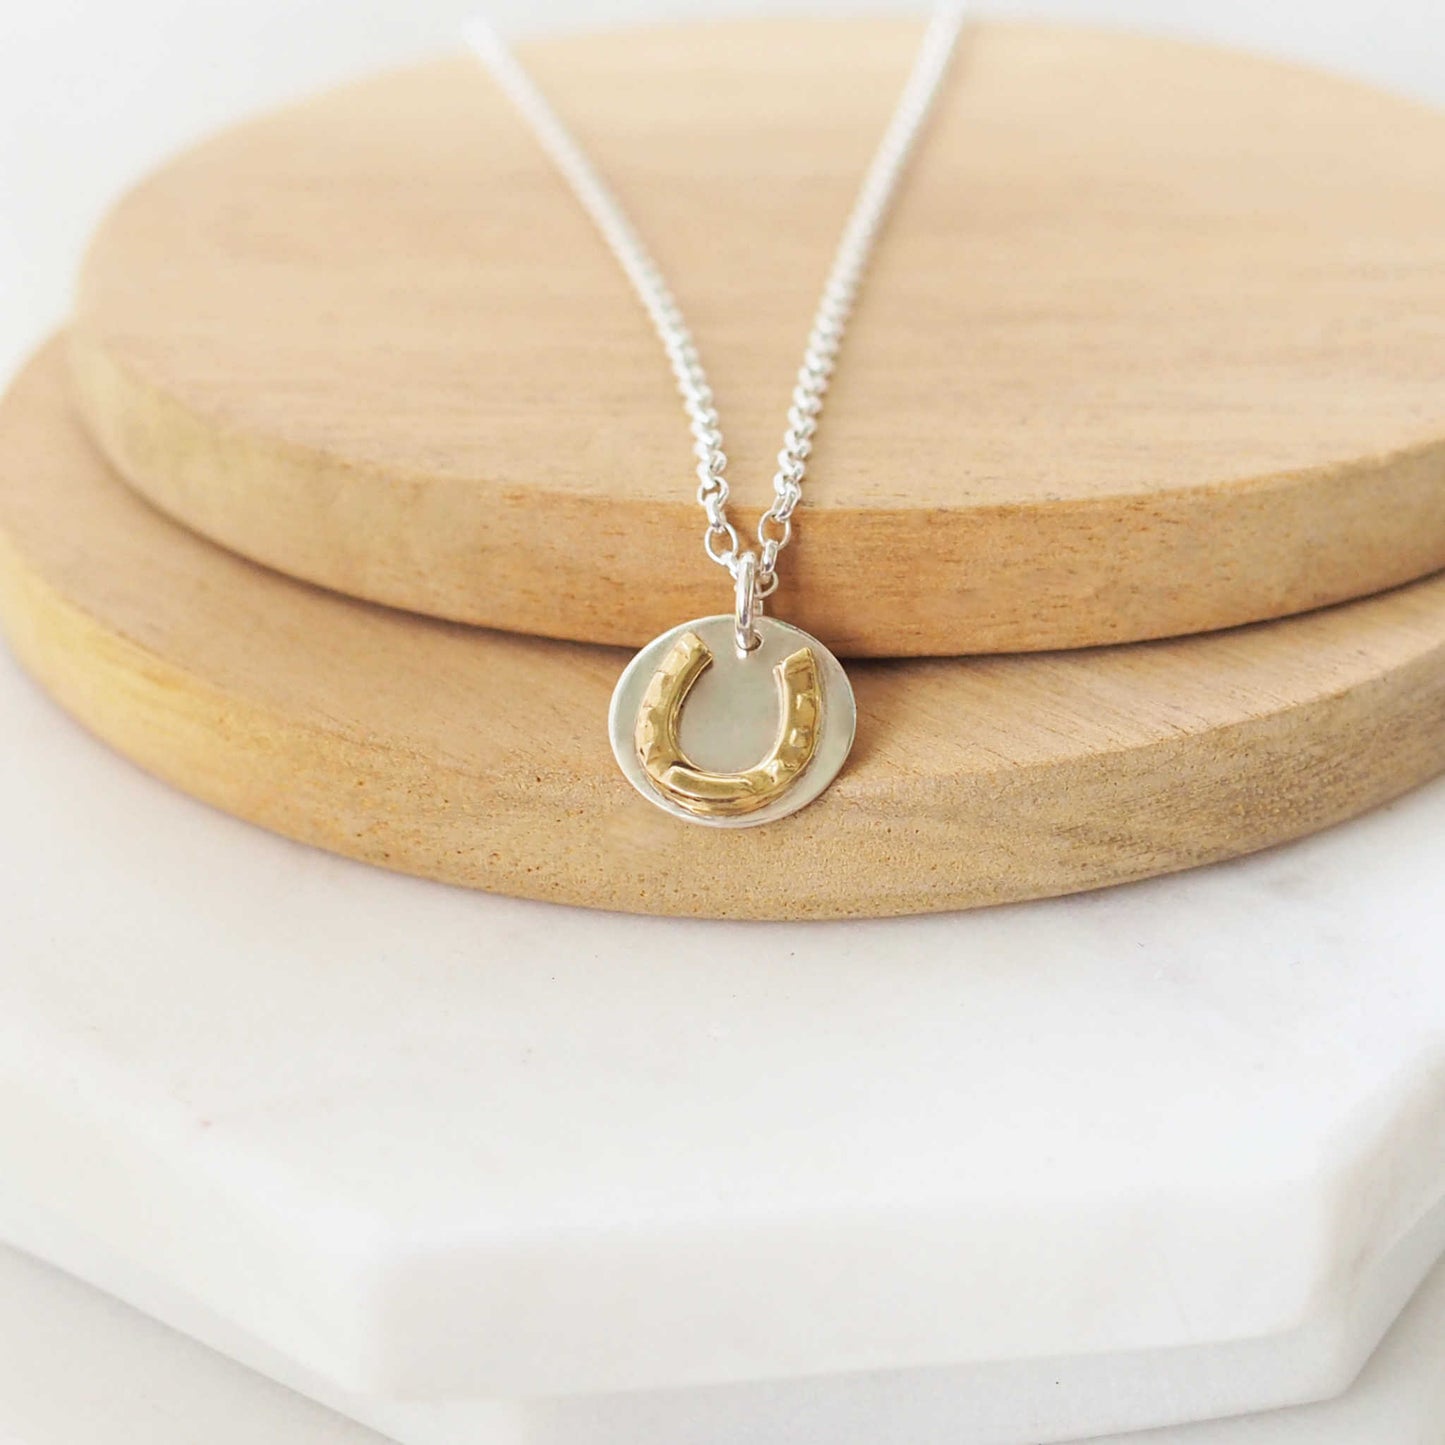 Coin disc charm necklace in Sterling Silver with a gold horseshoe design. A gift for love and luck. Made from Sterling SIlver and brass, handmade in Edinburgh UK by maram jewellery